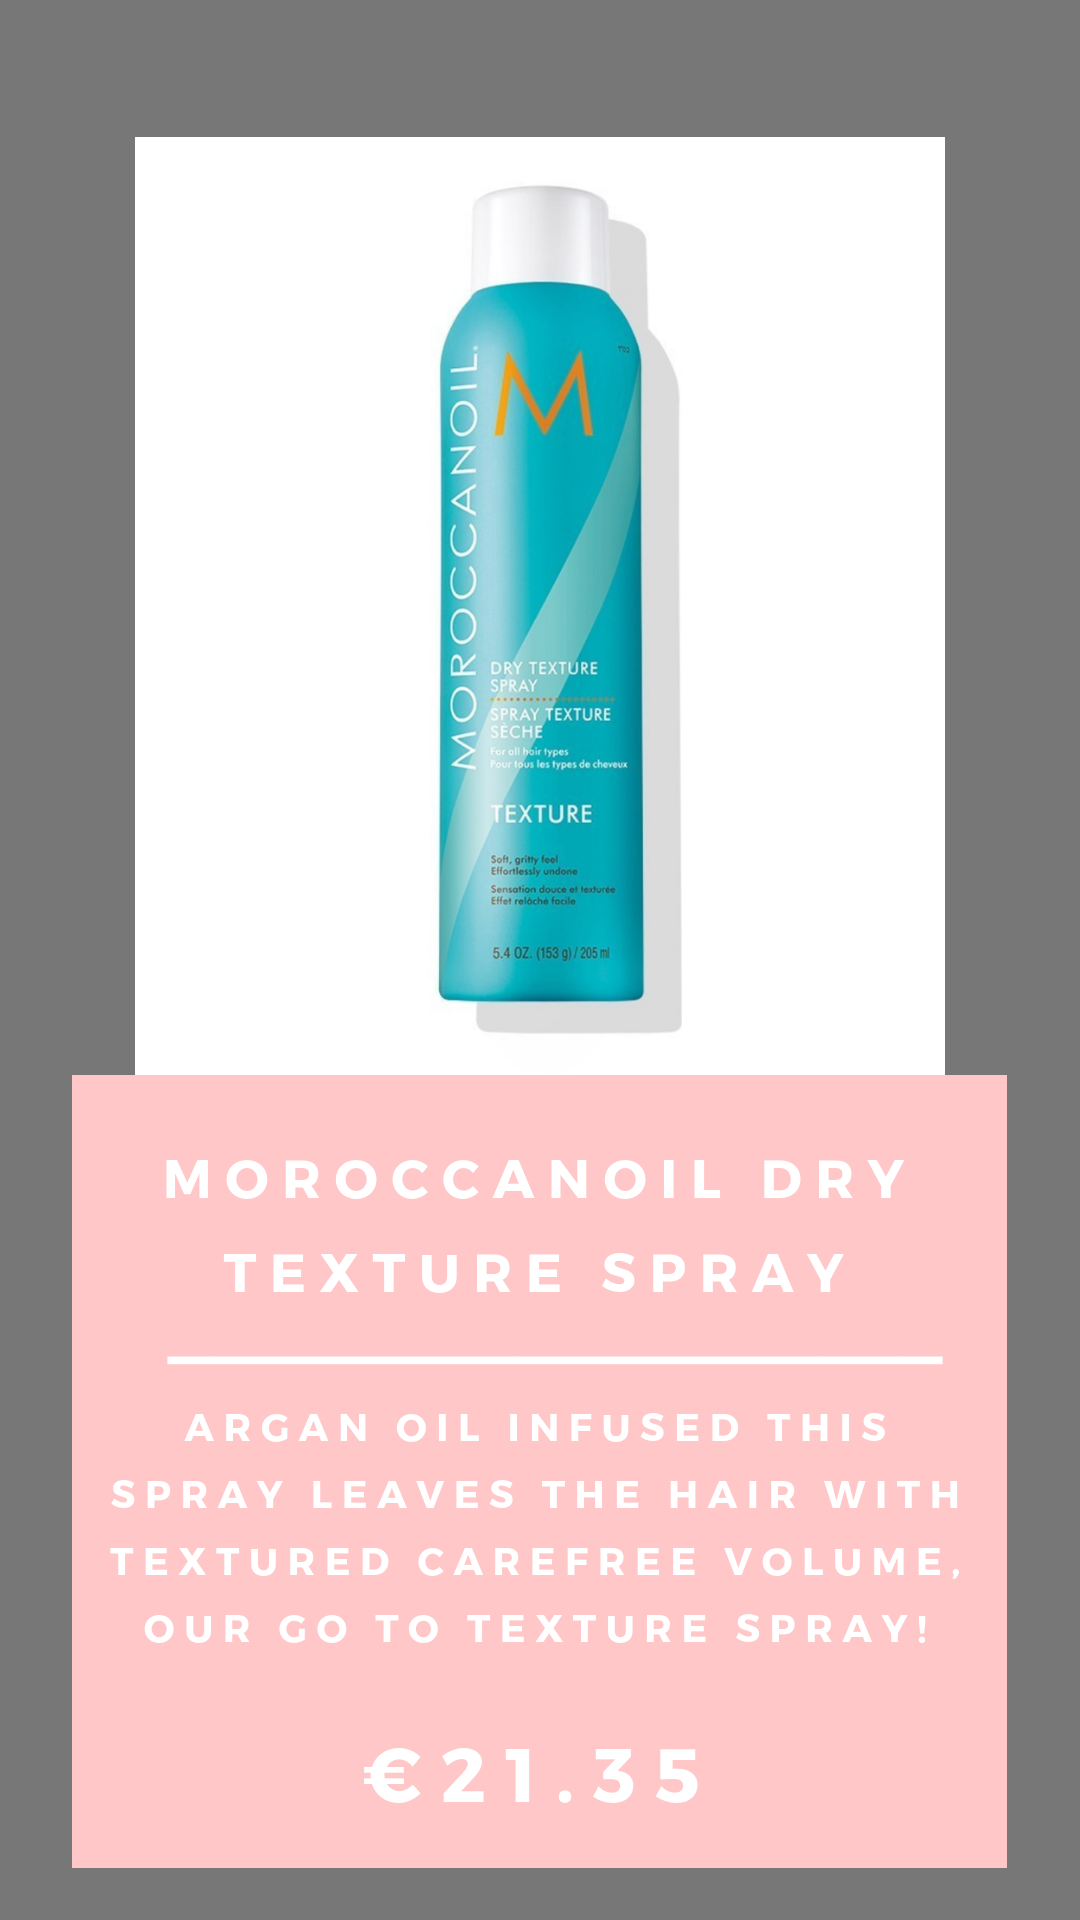    SHOP THE MOROCCANOIL DRY TEXTURE SPRAY HERE!   